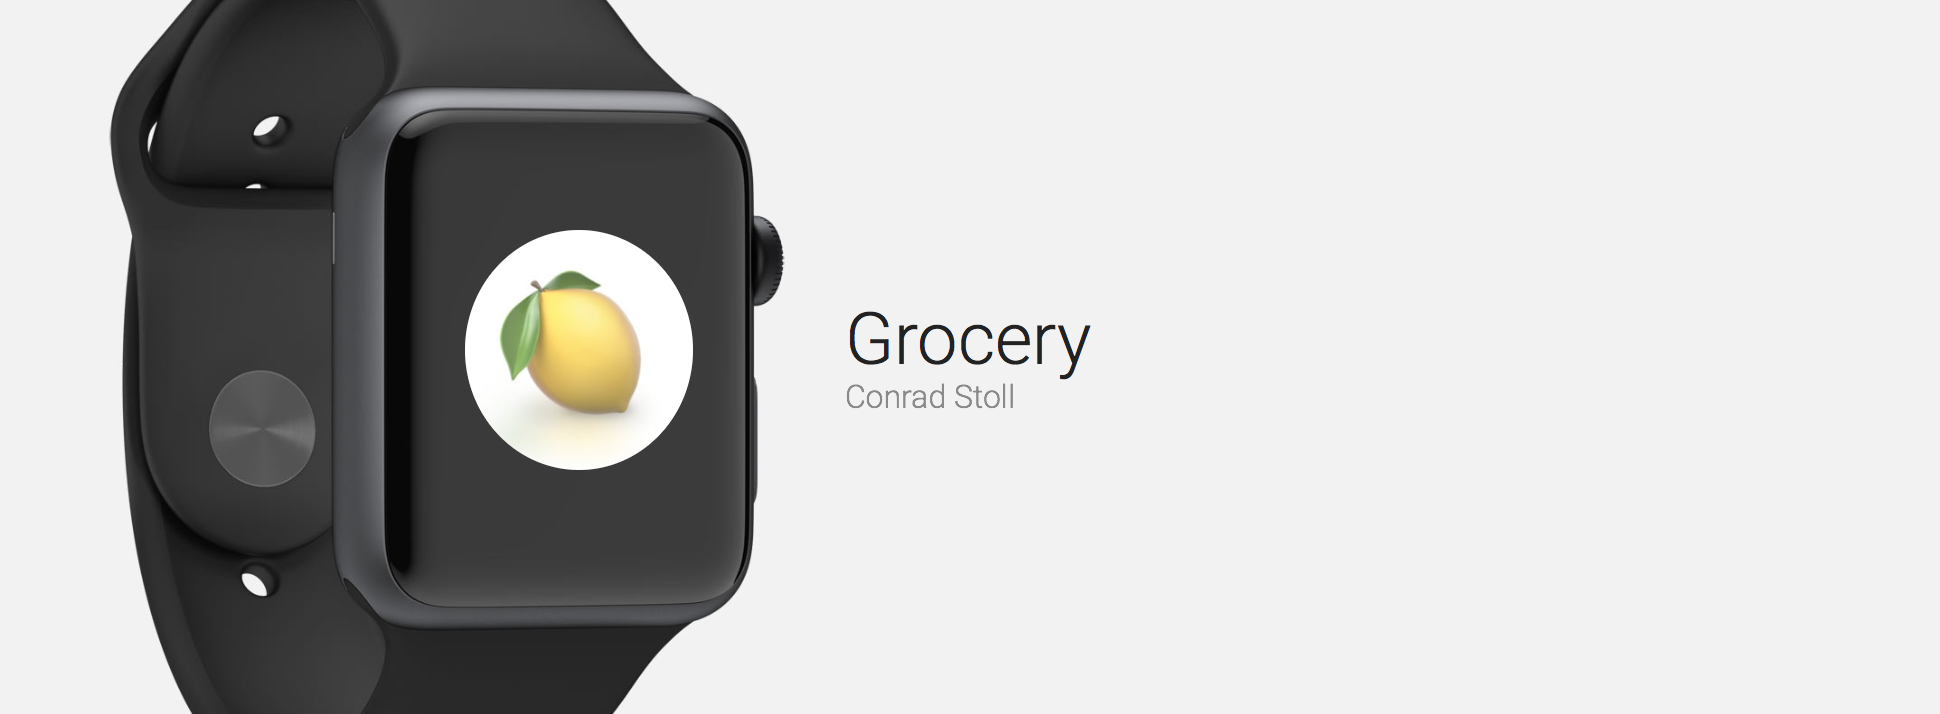 Grocery is a Great Grocery Shopping App for Apple Watch